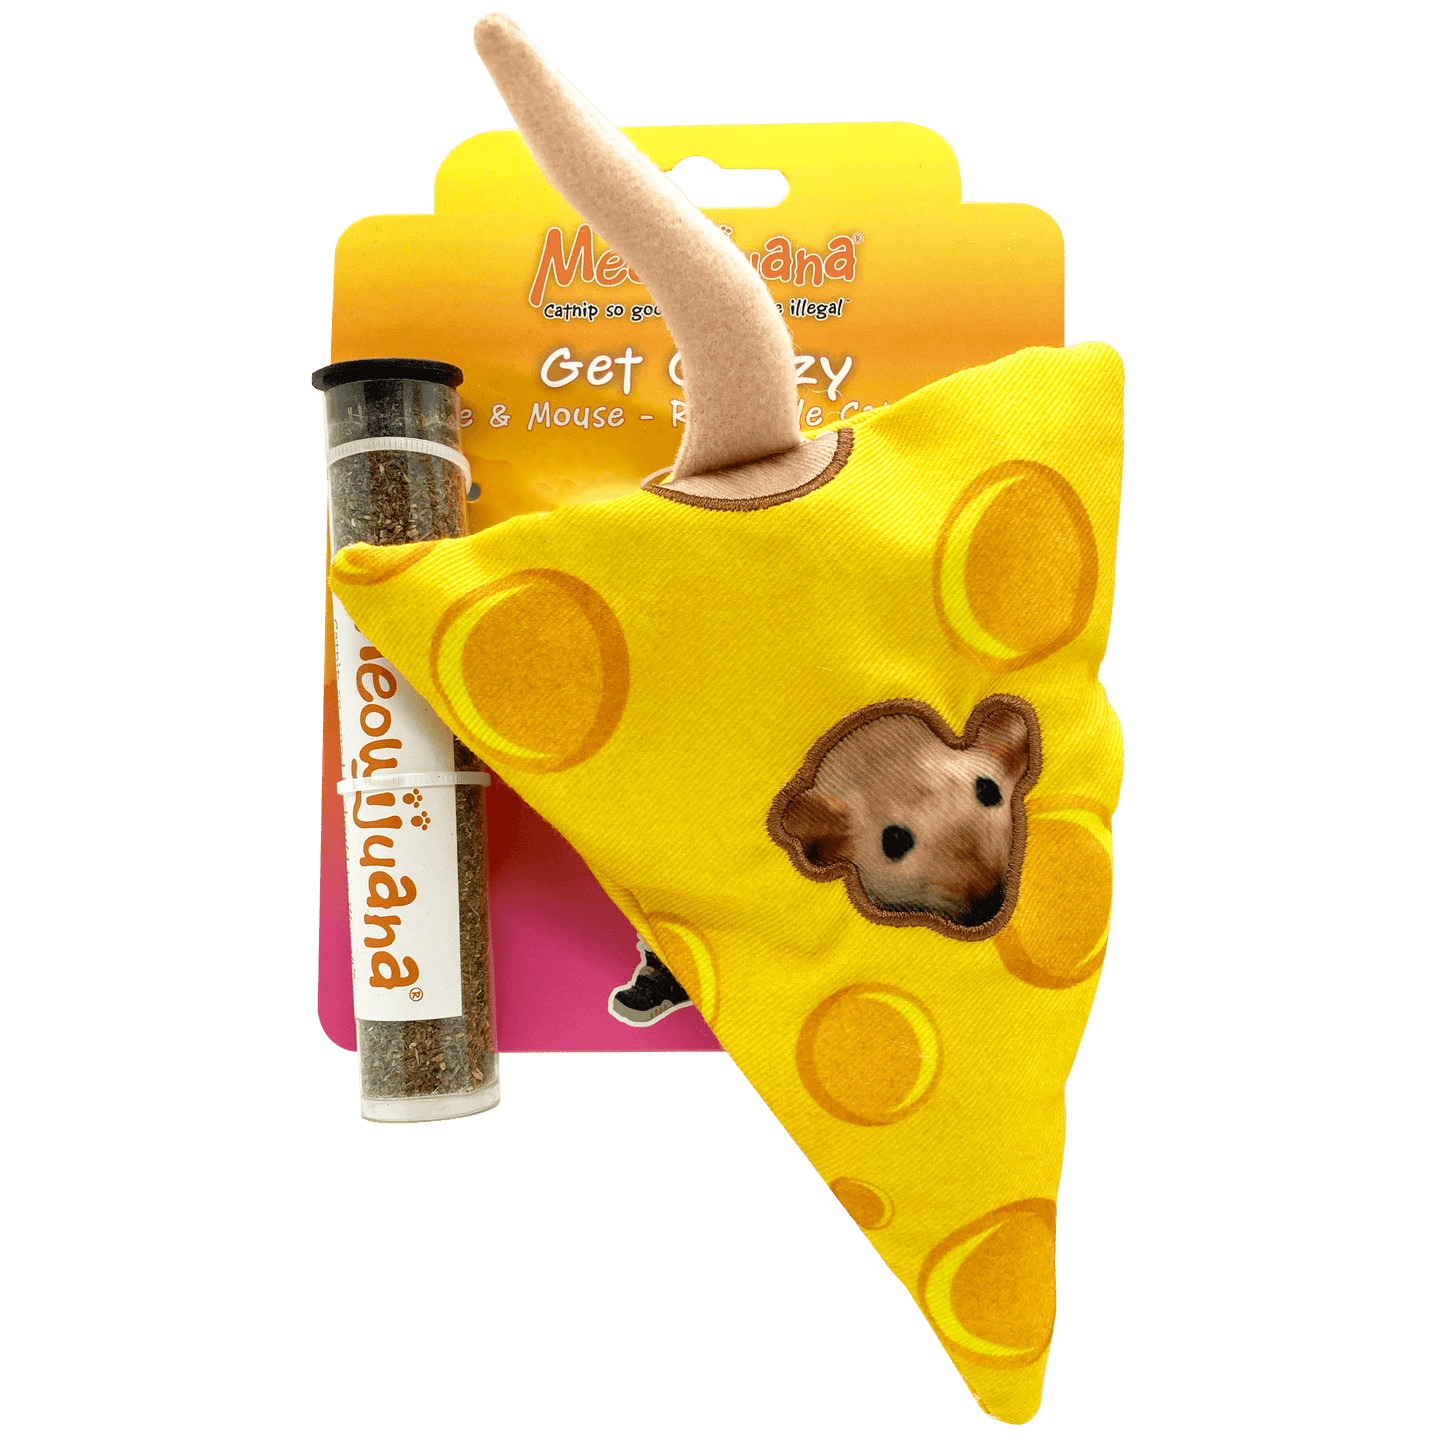 Get Cheezy Refillable Cheese & Mouse